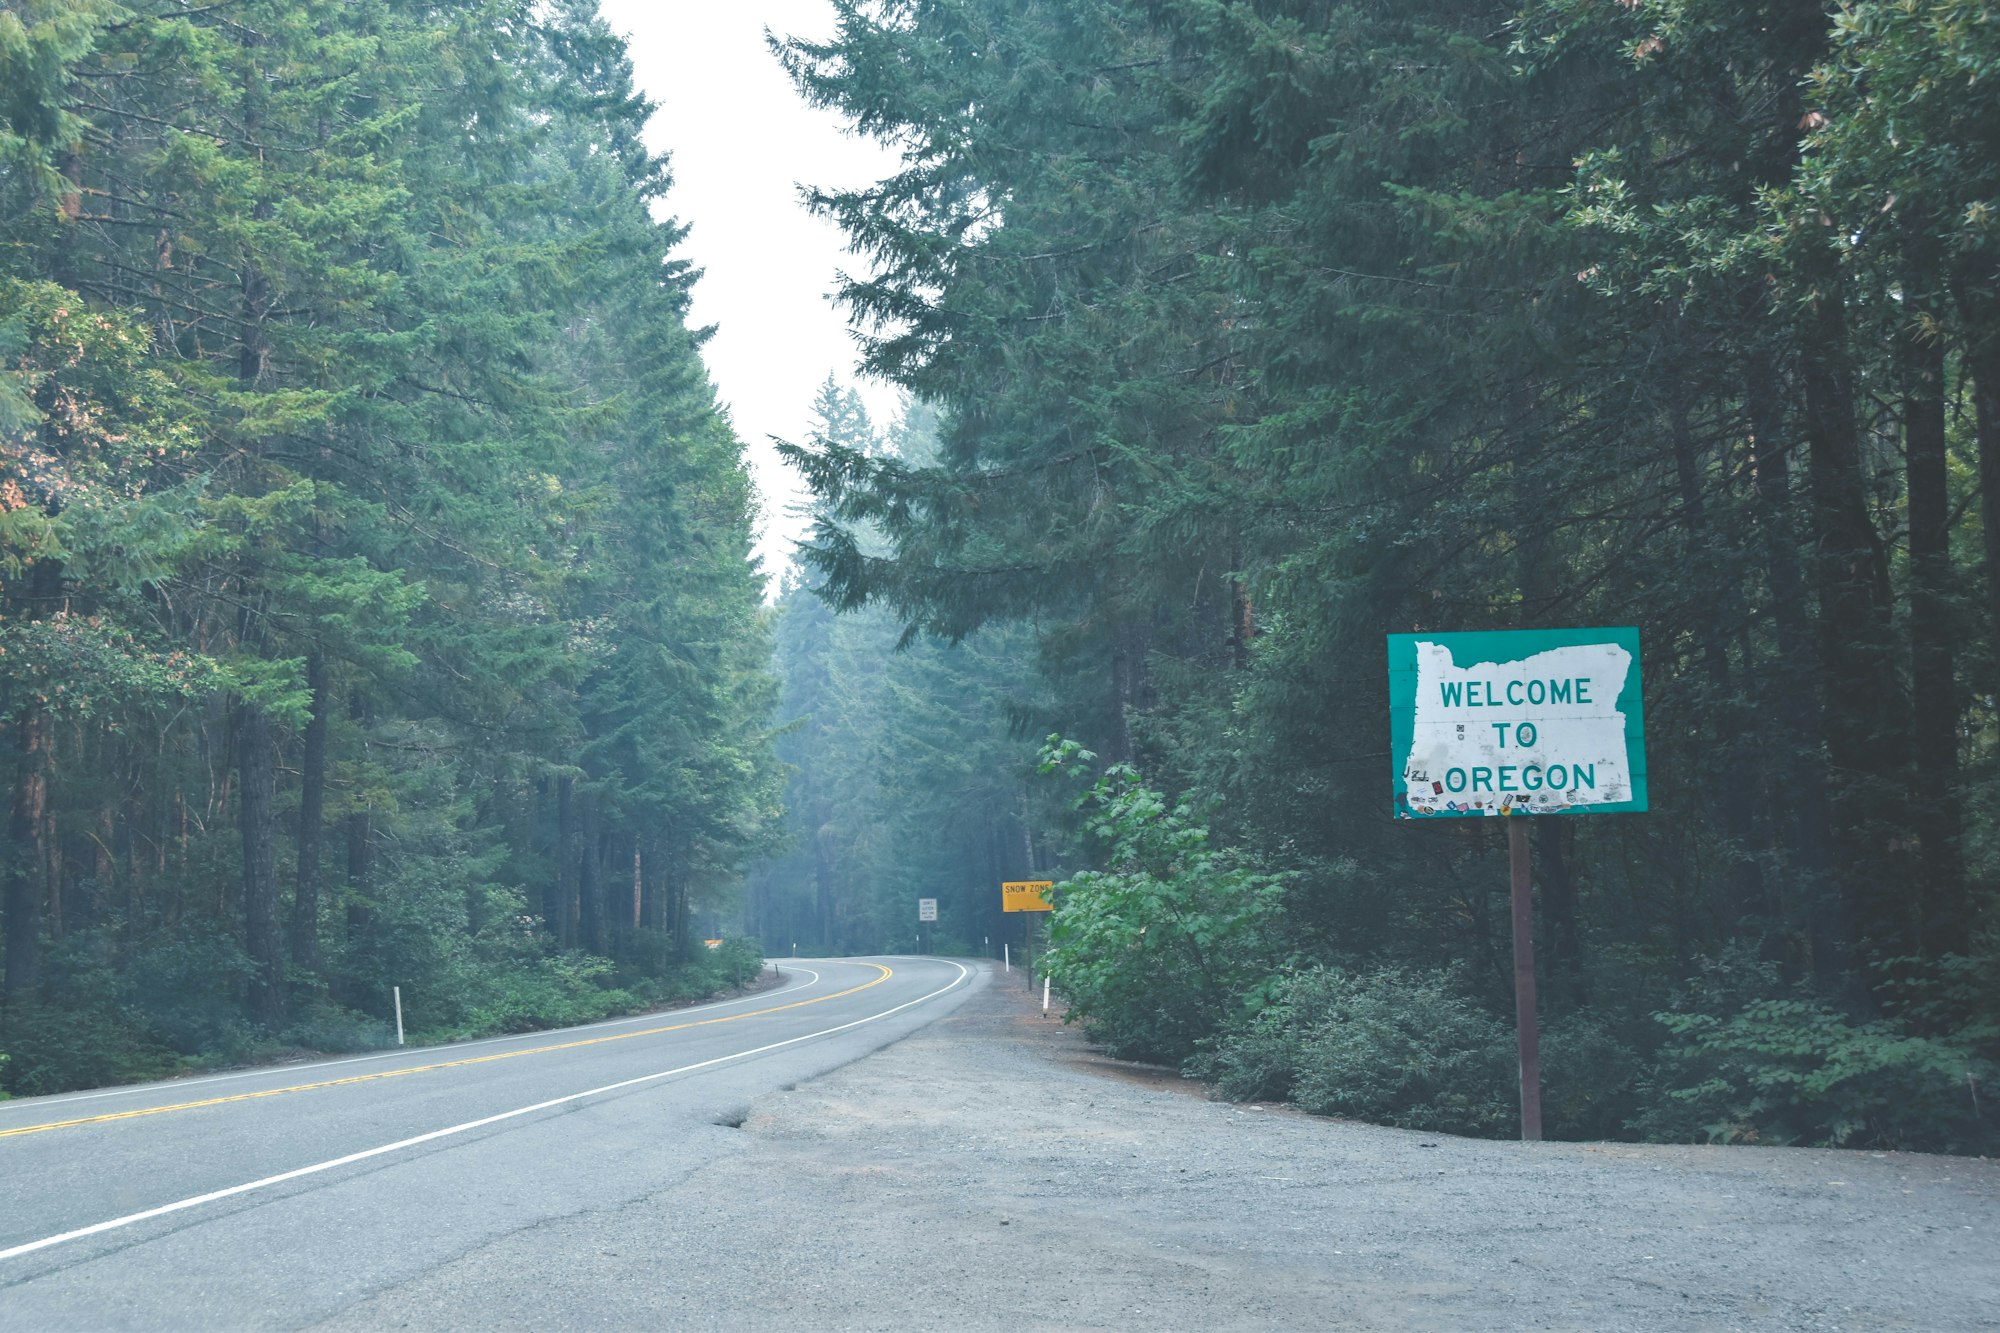 I was driving a little too fast on this windy forest road and when I saw this sign I tried to pull out my camera in time but I was not fast enough. So I had to turn around and go back to capture this and wait a few minutes for someone else with the same idea to move out of the way, but it was definitely worth the trouble.